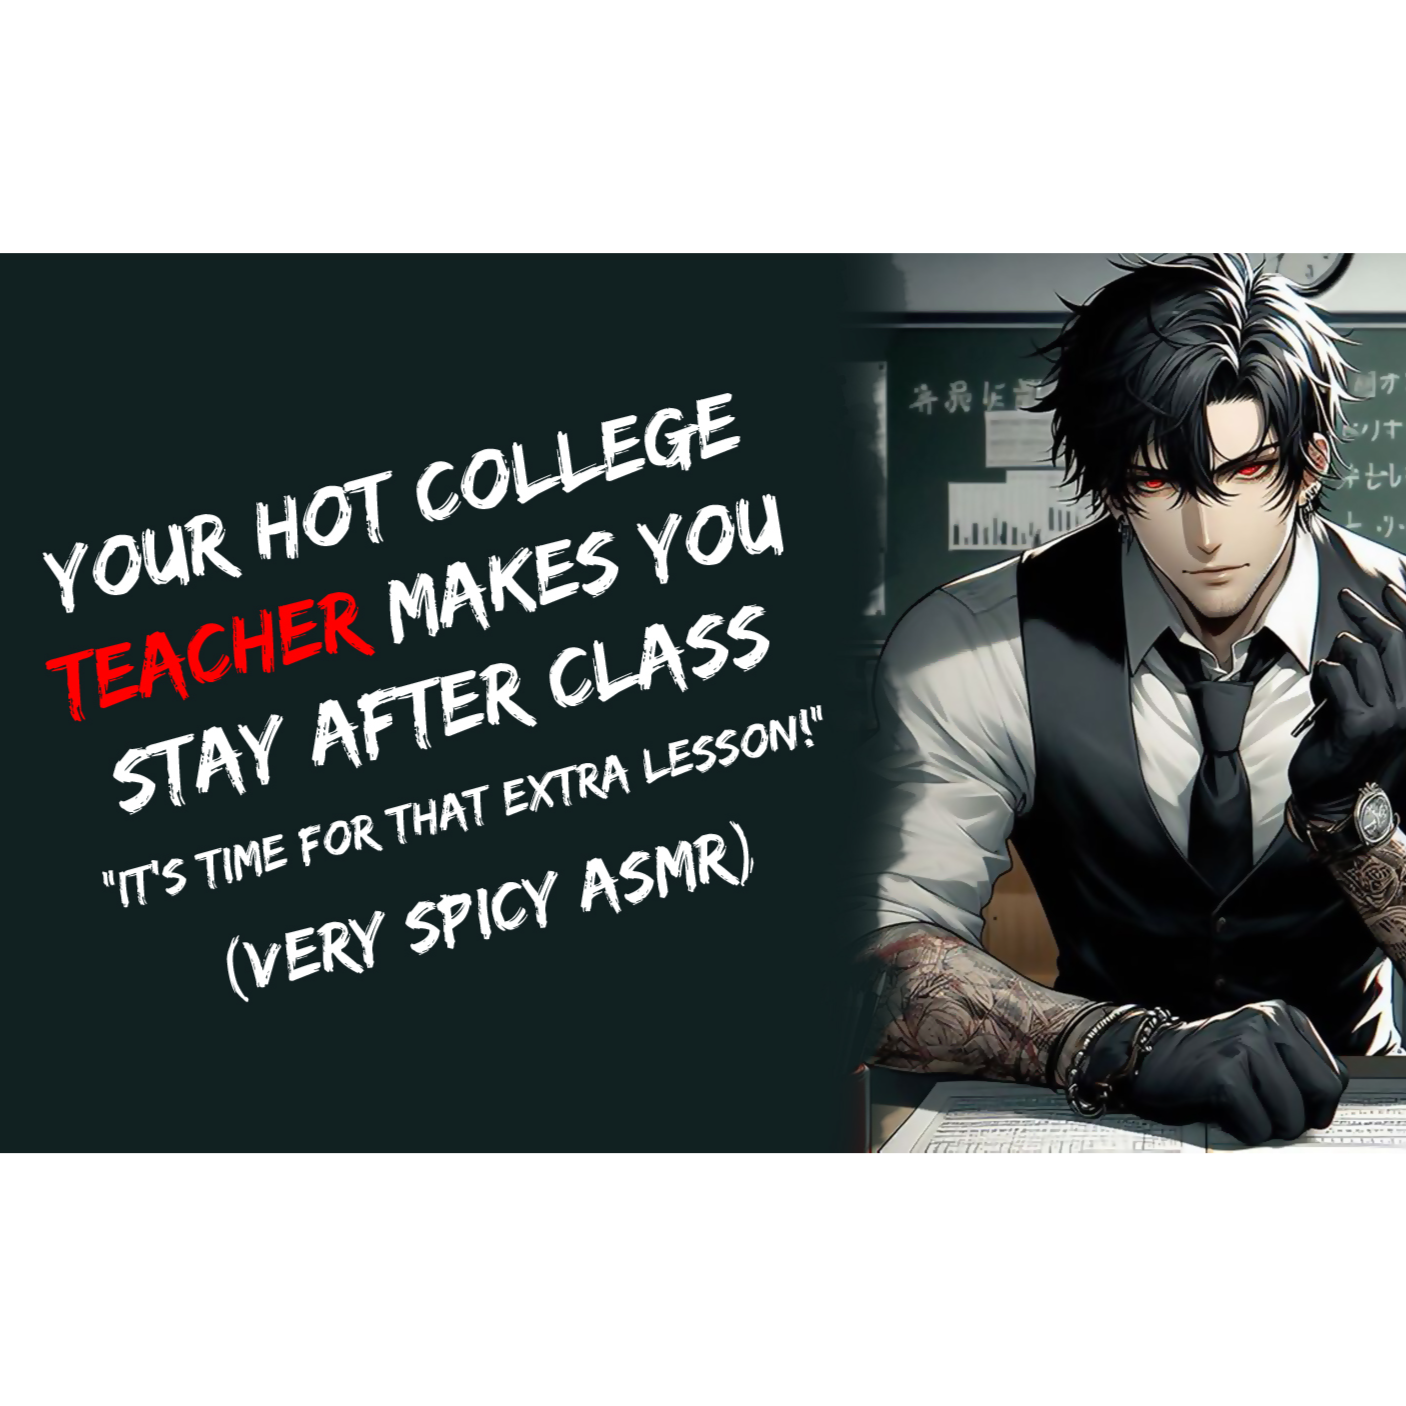 Your Hot College Teacher Makes You Stay After Class "It's Time For That Extra Lesson" (Spicy ASMR)